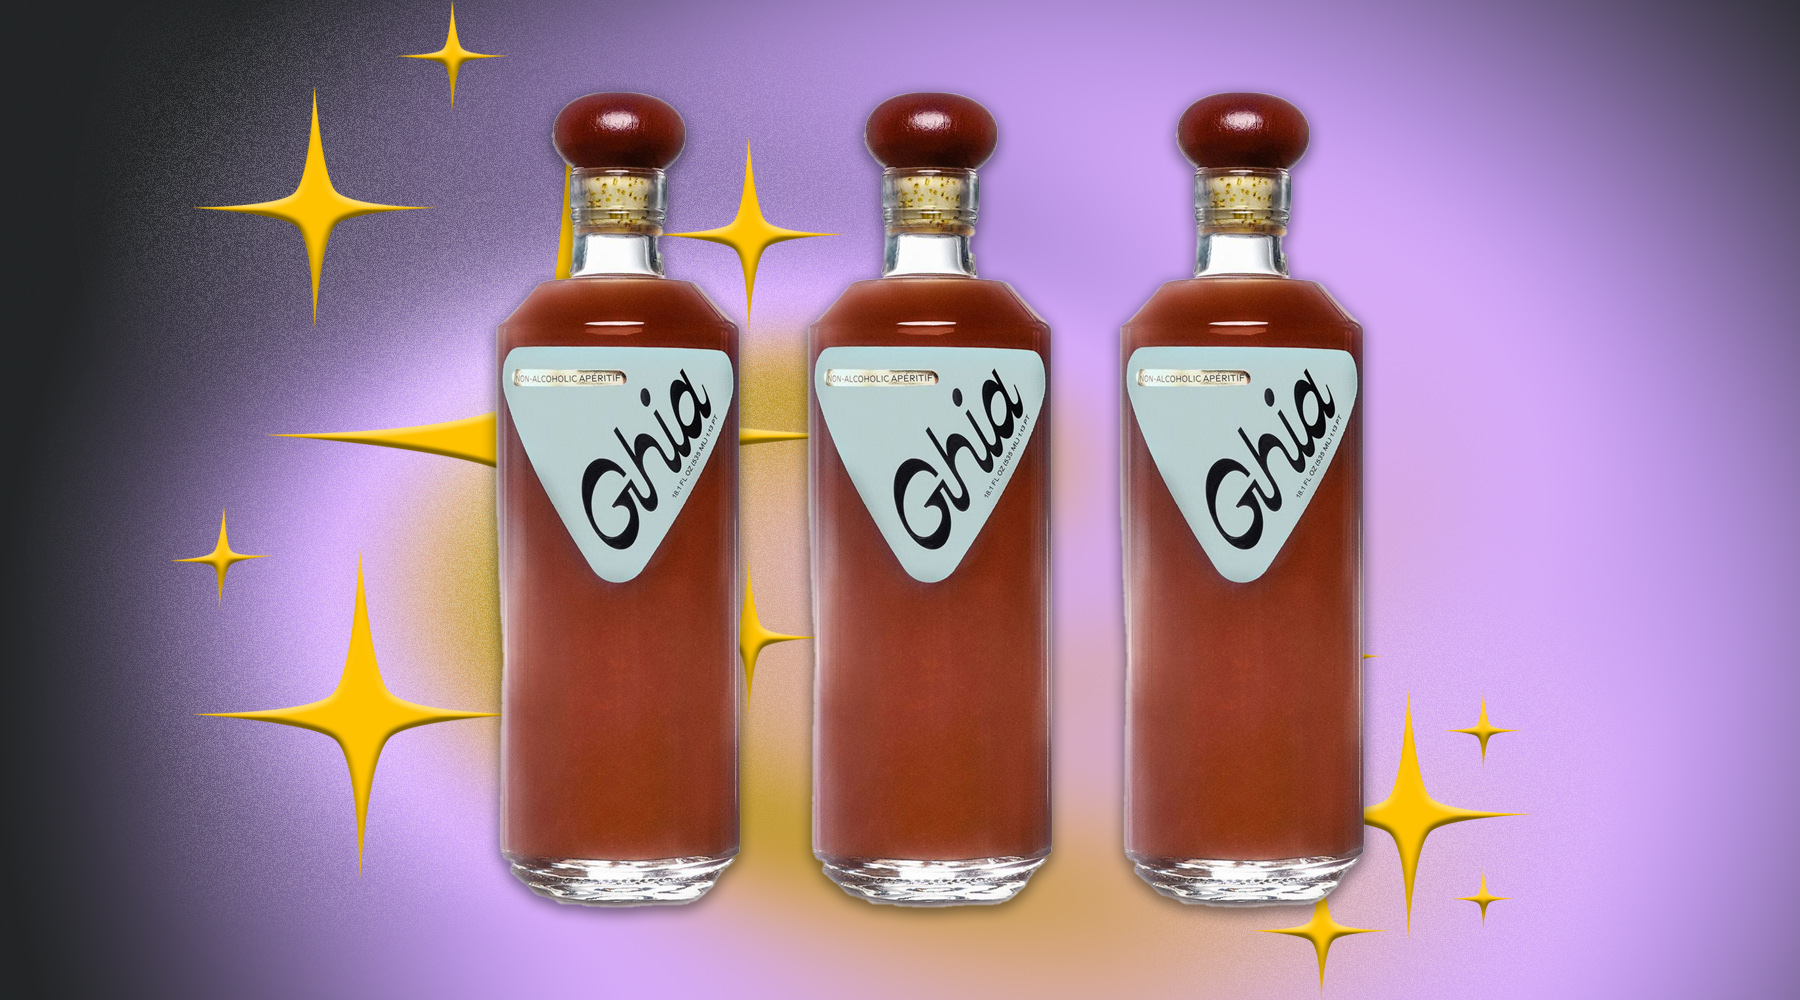 Ghia Drink Review The Non-Alcoholic Aperitif Everyones Talking About